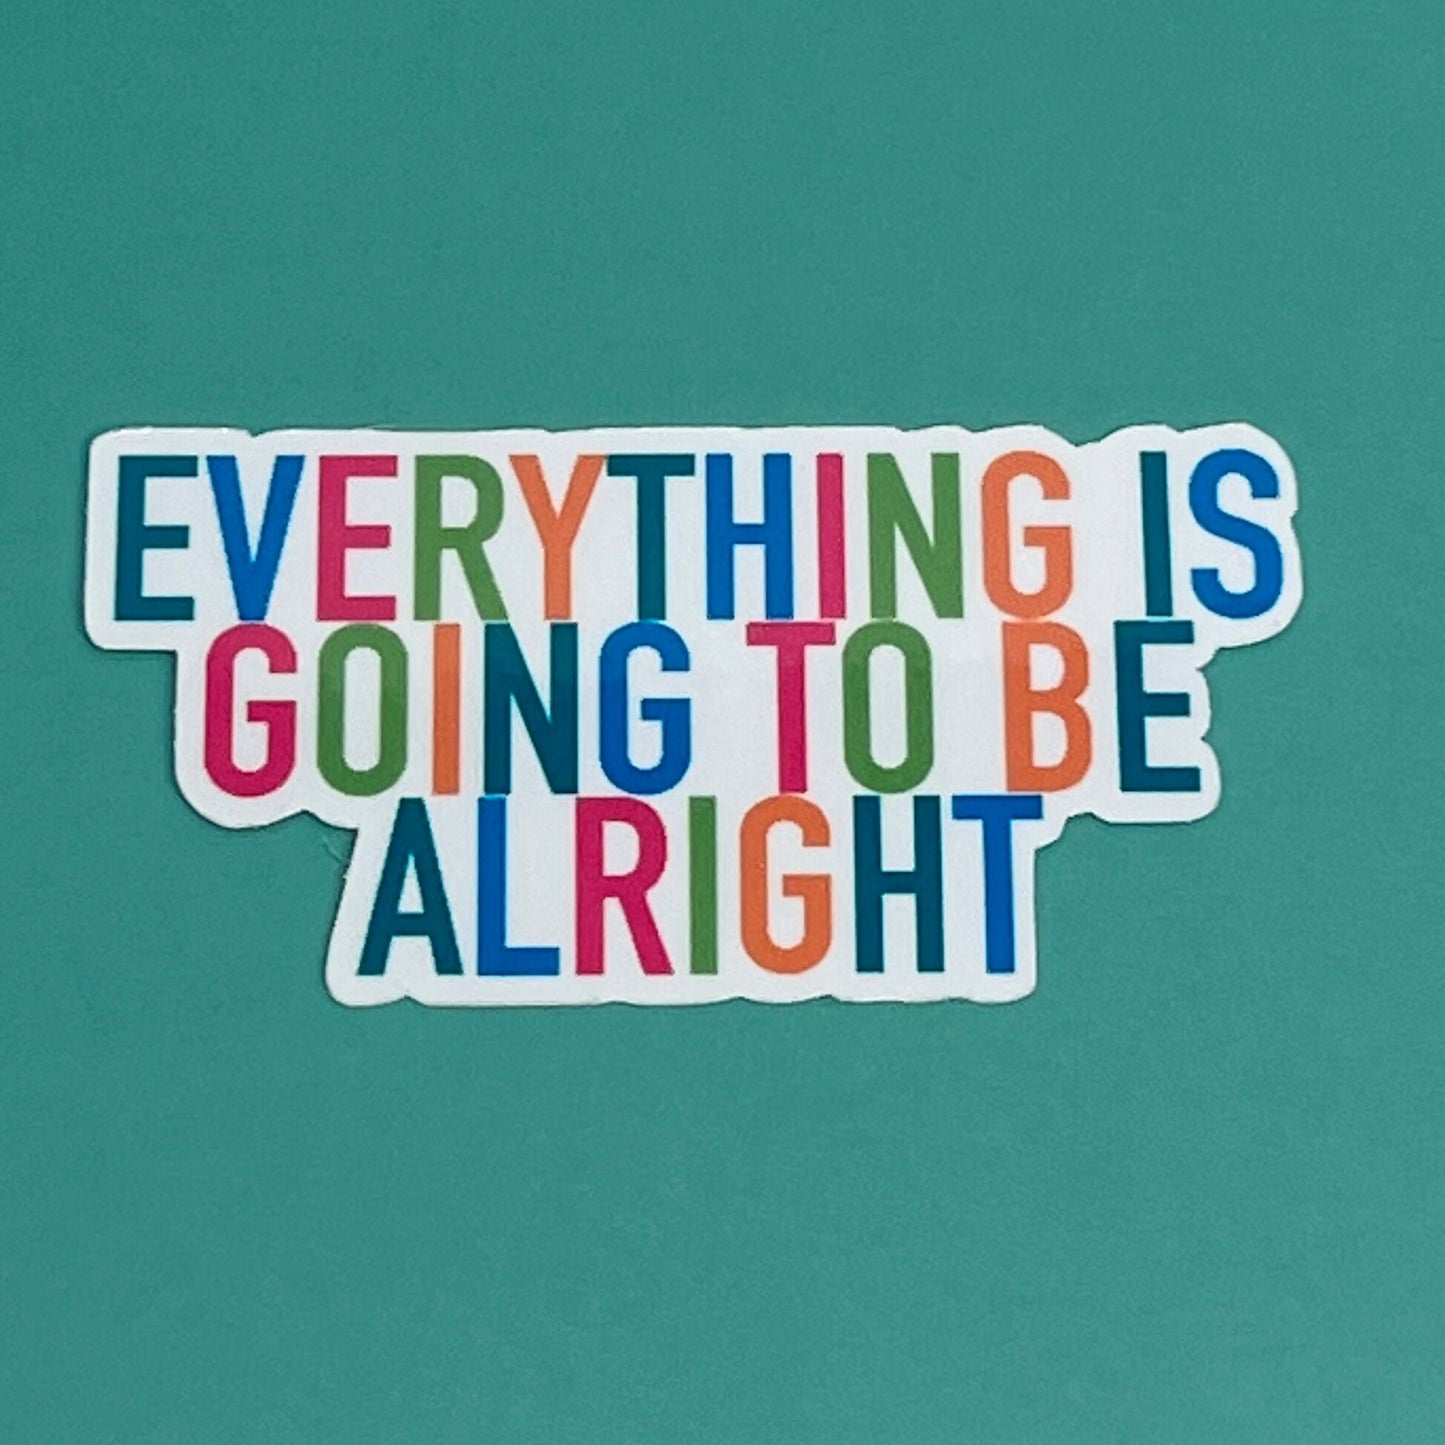 Everything is going to be alright - Waterproof Sticker